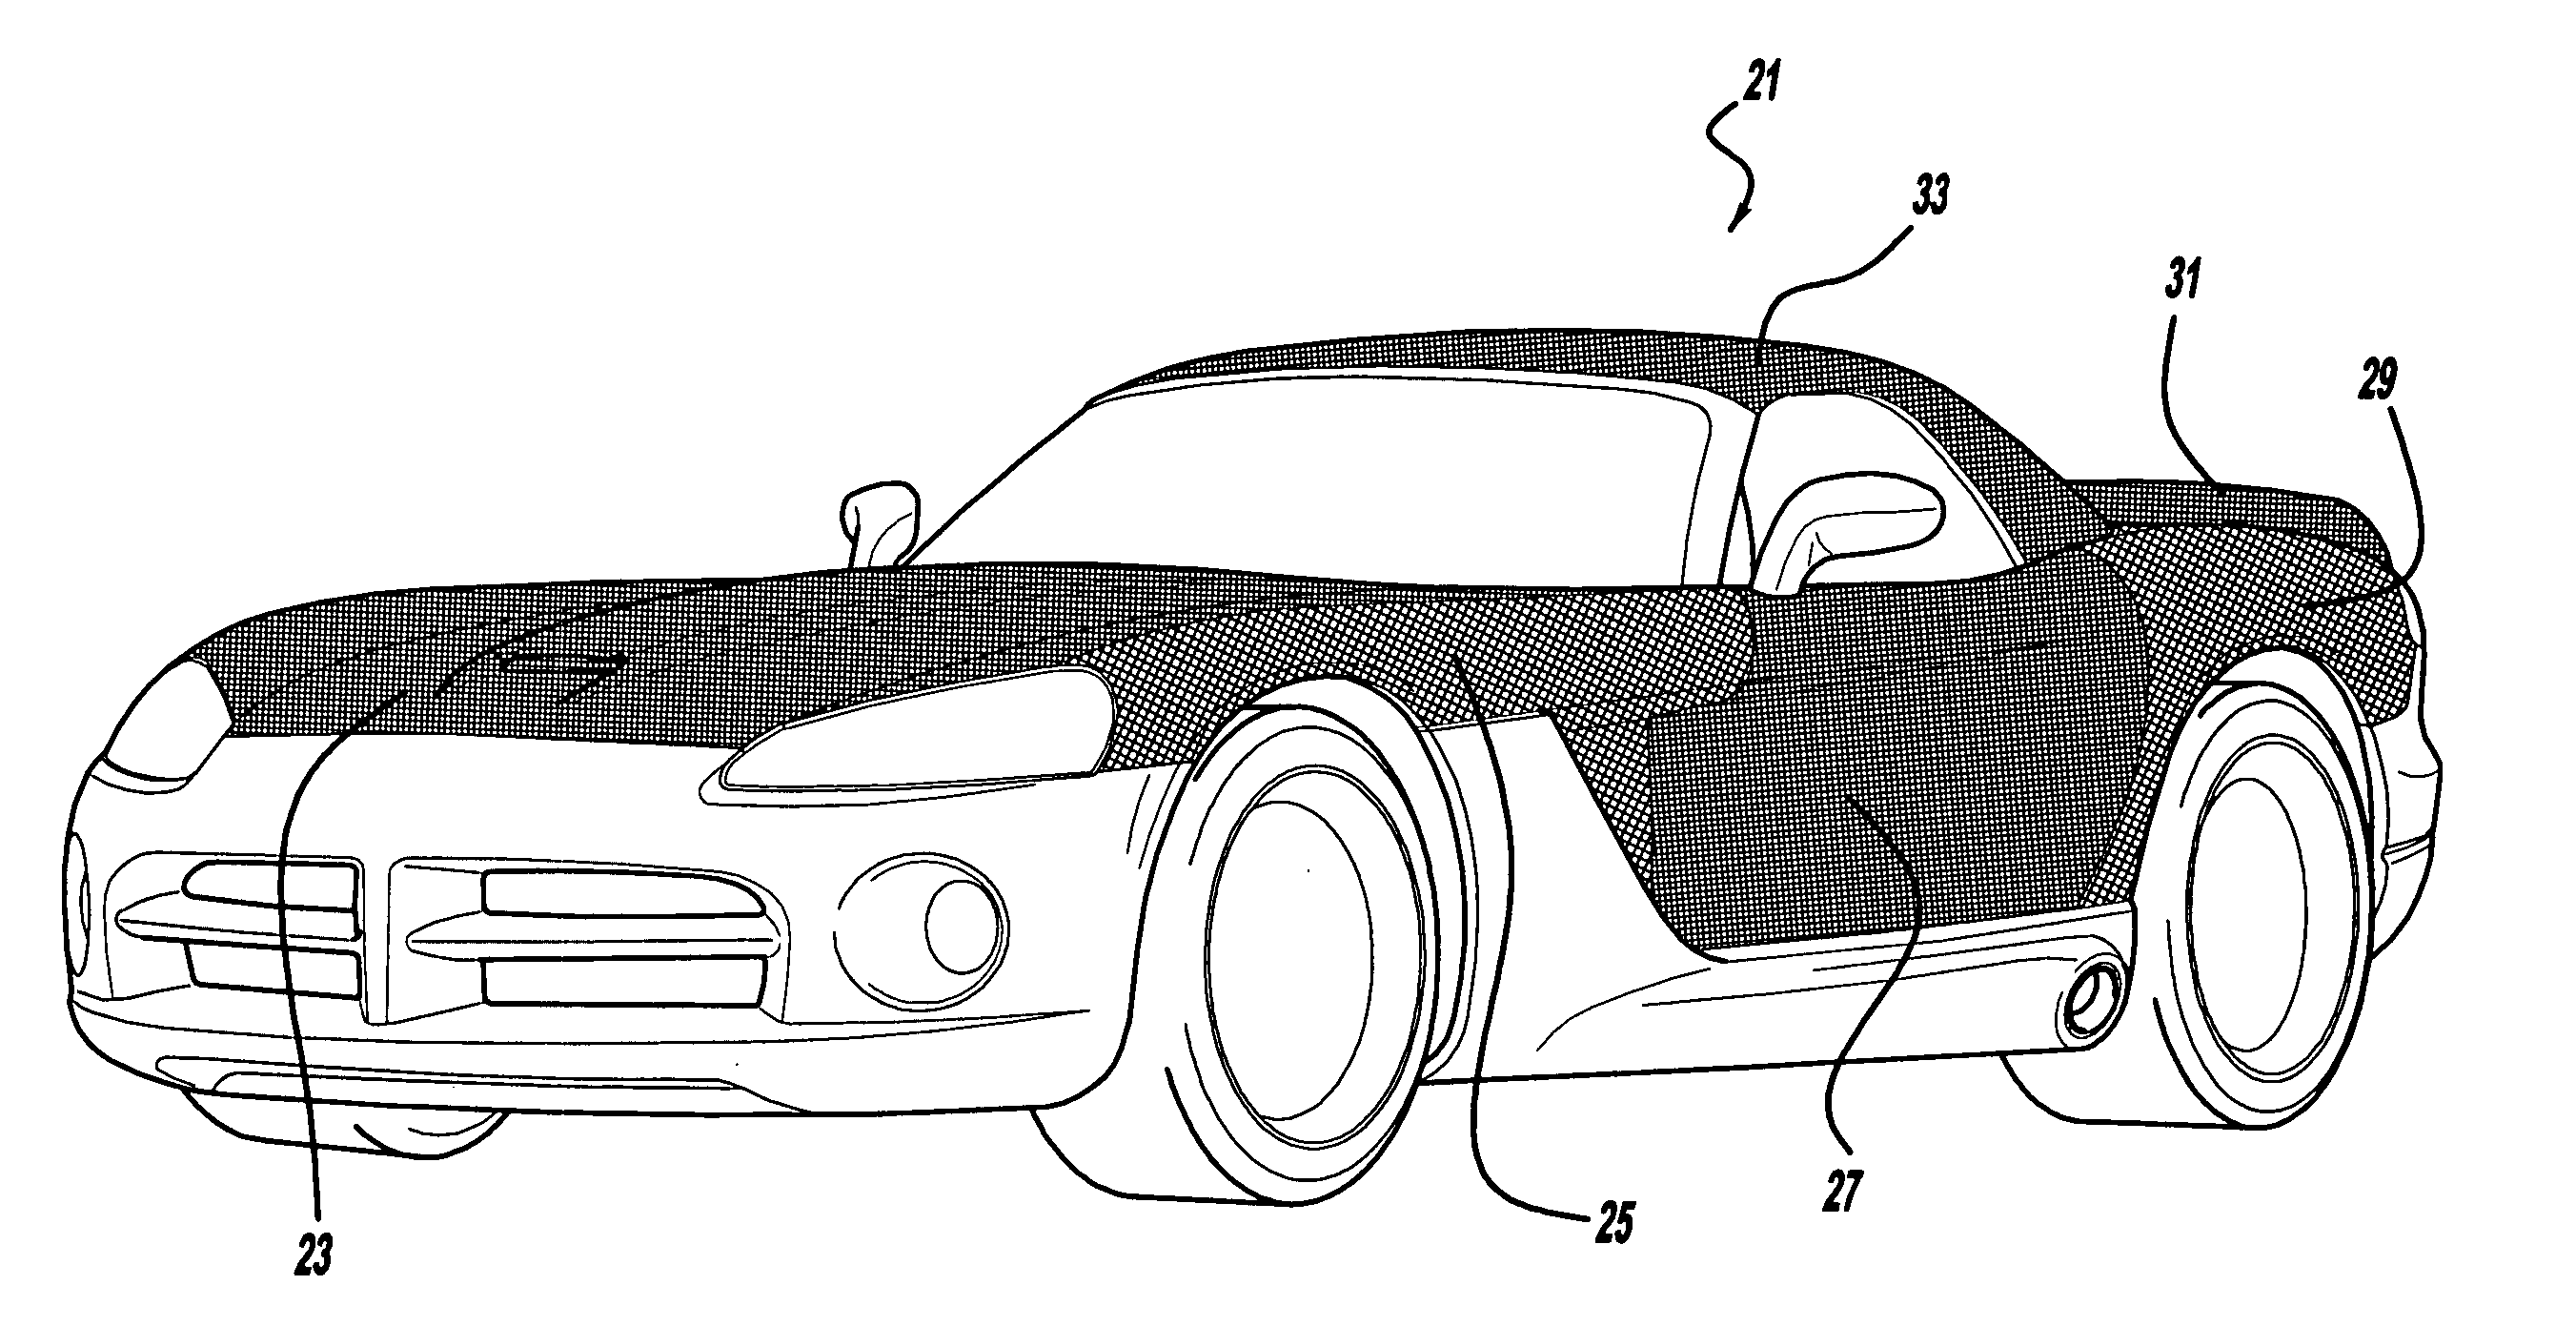 Hybrid composite product and system